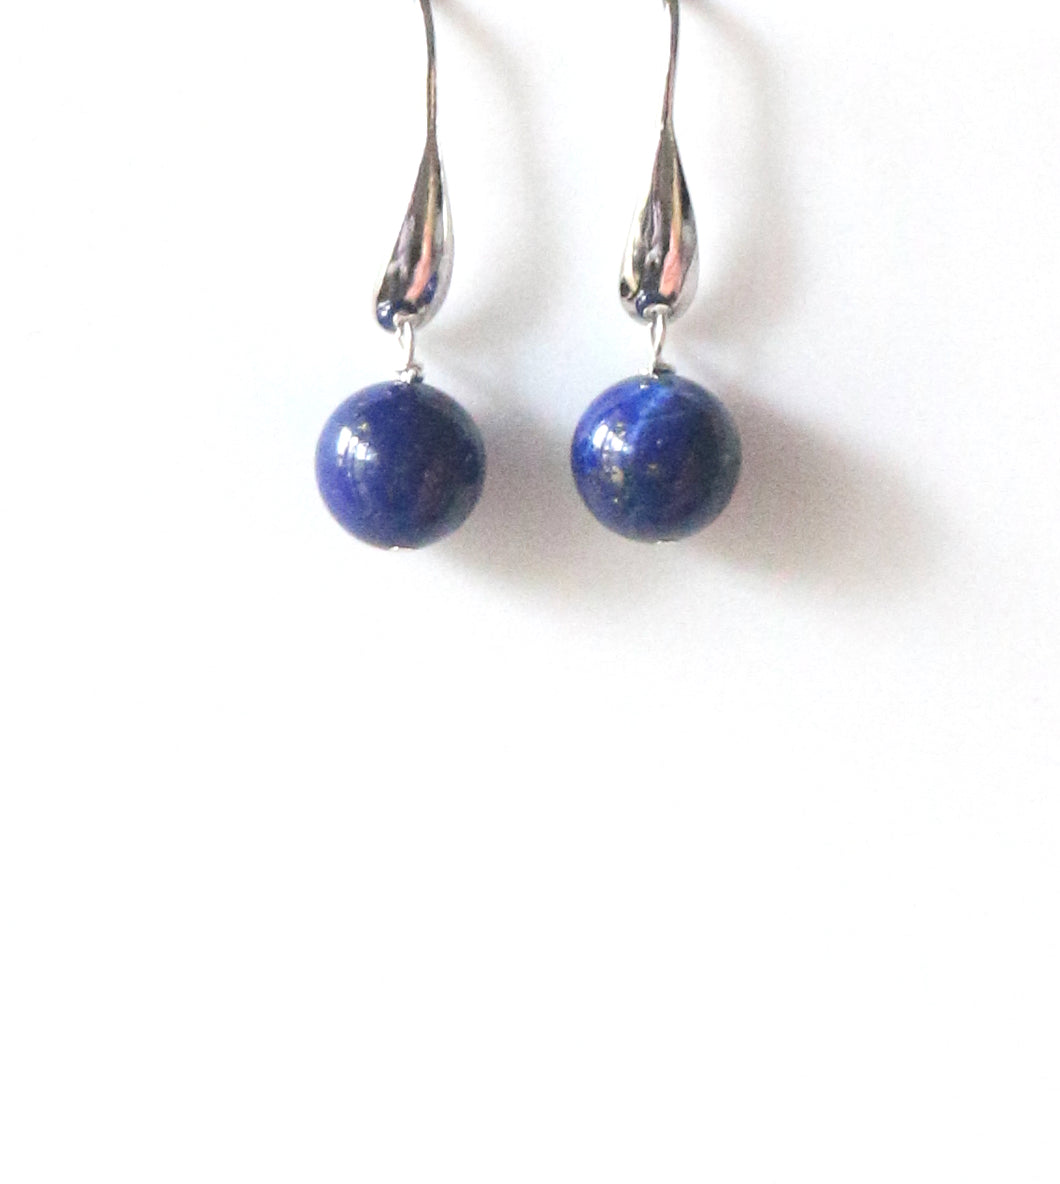 Blue Earrings with Lapis Lazuli and Sterling Silver